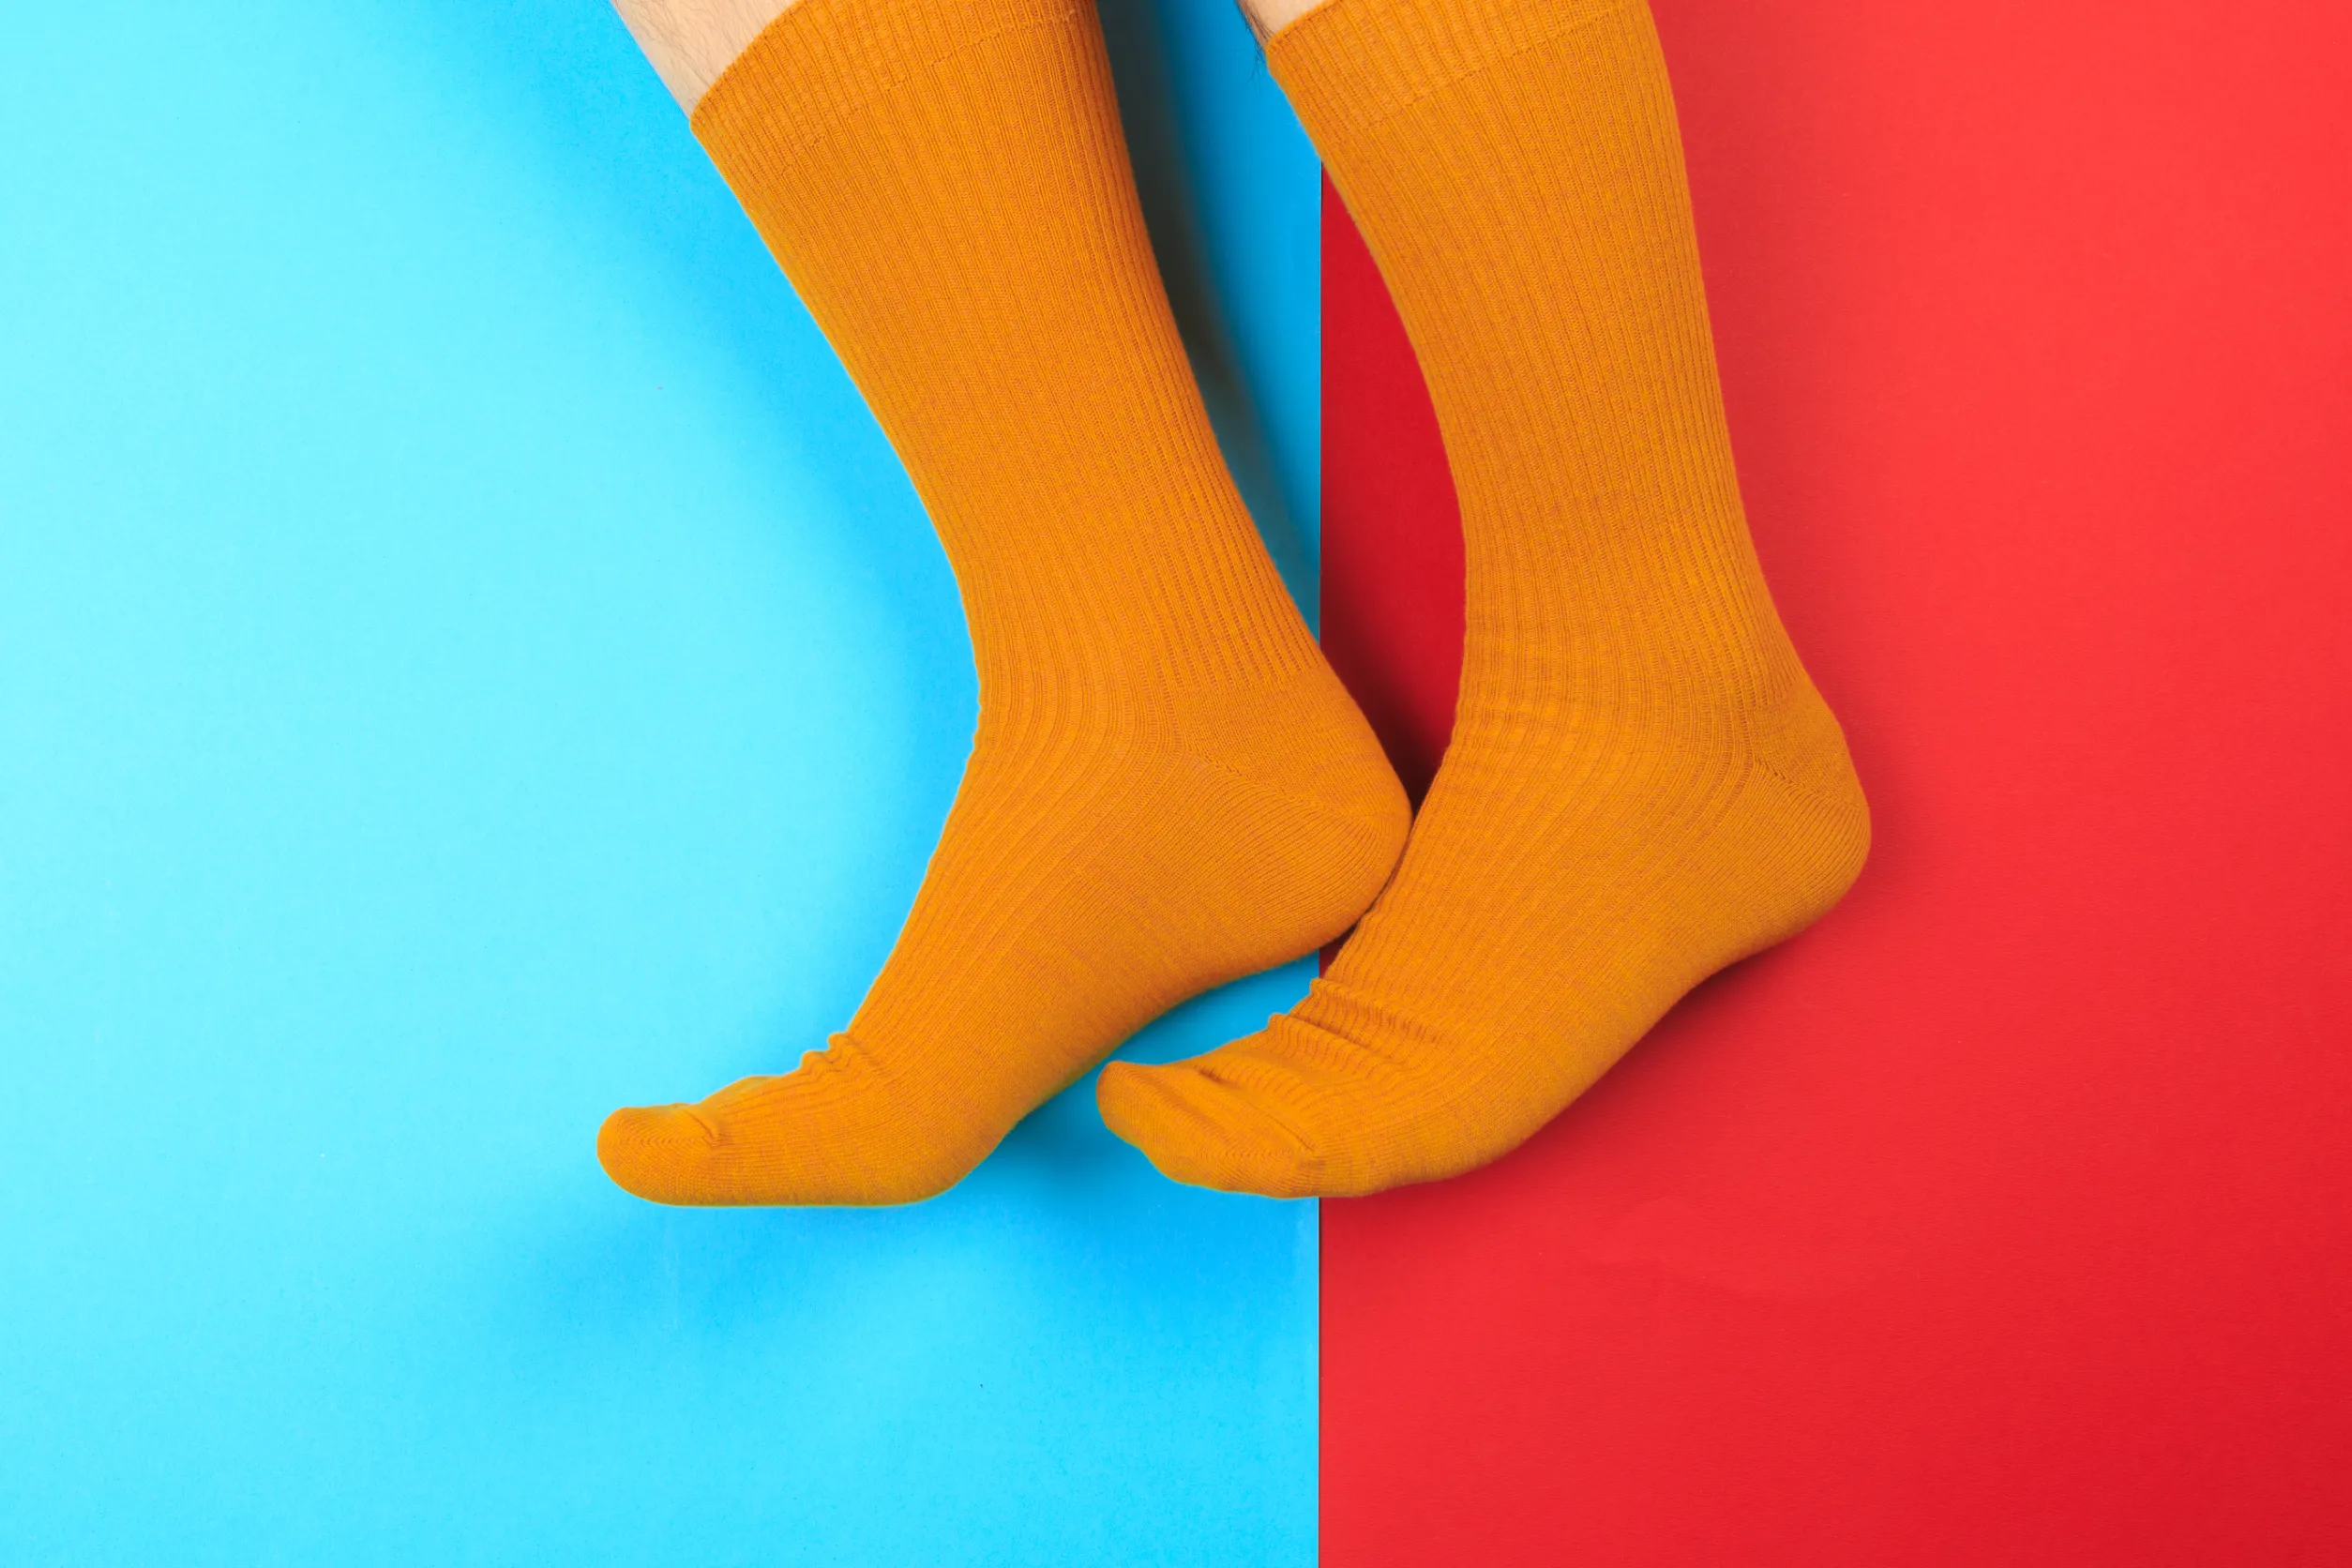 legs in colorful socks on colorful background